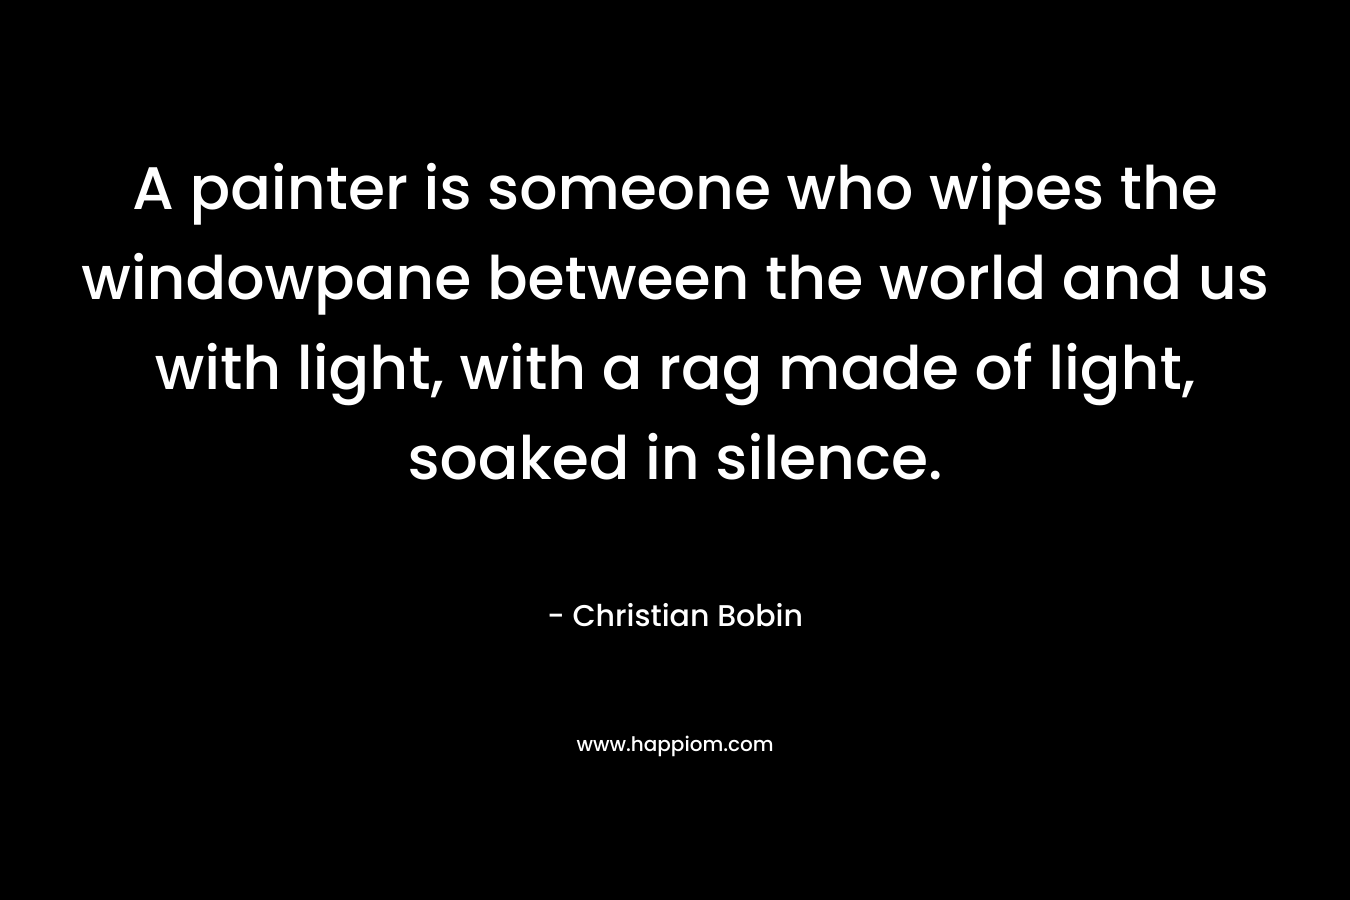 A painter is someone who wipes the windowpane between the world and us with light, with a rag made of light, soaked in silence.